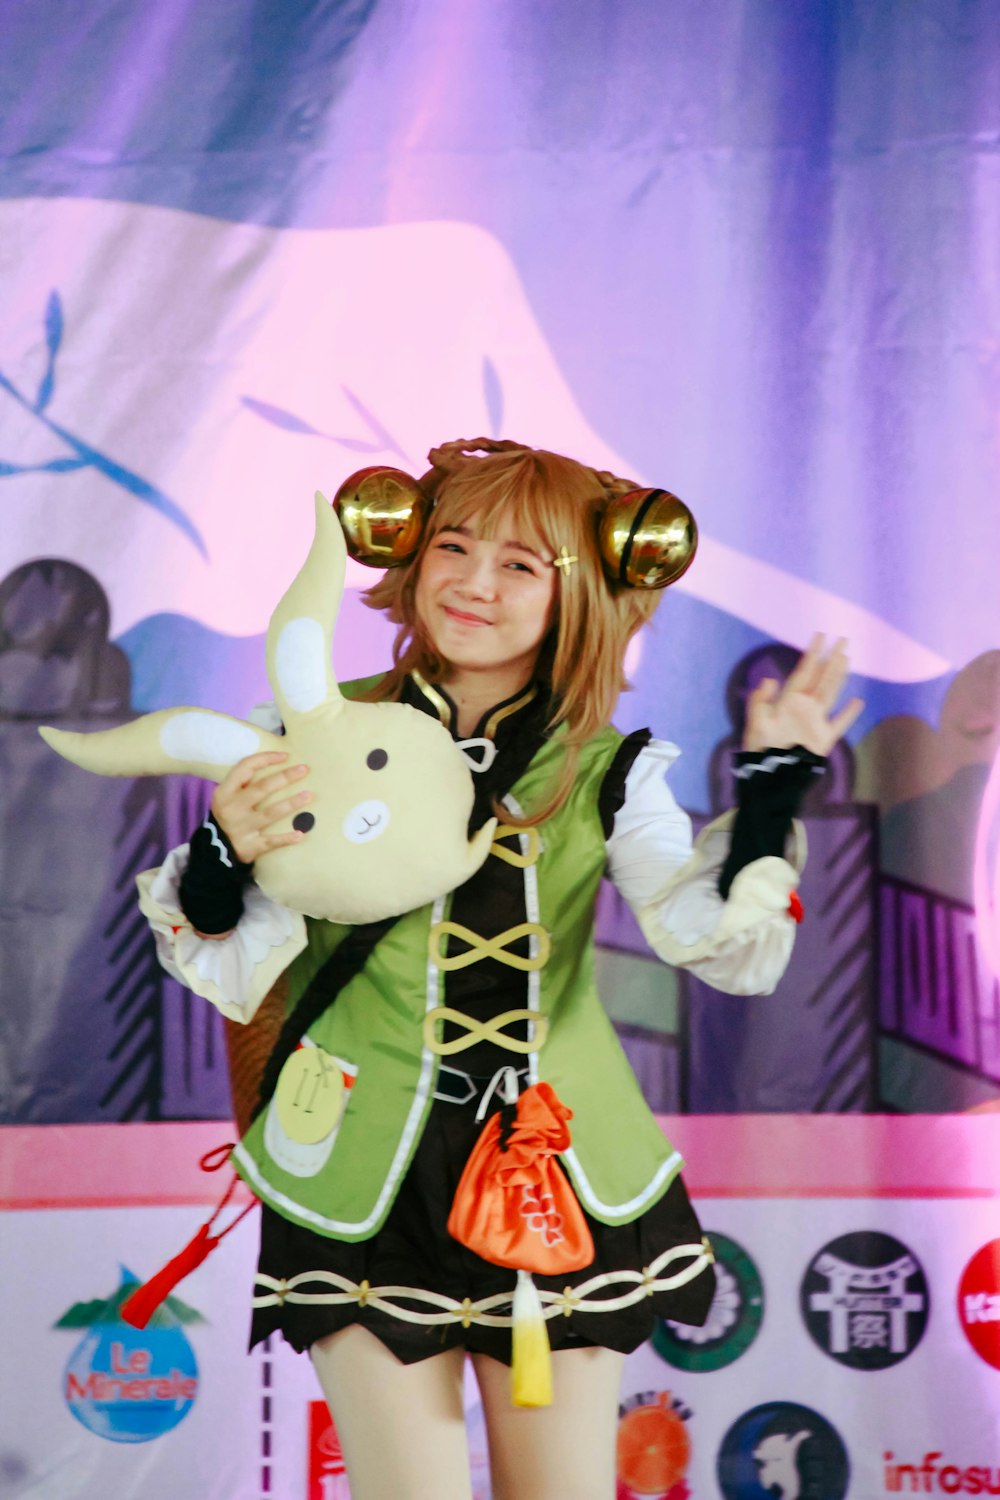 a woman holding a stuffed animal on top of a stage